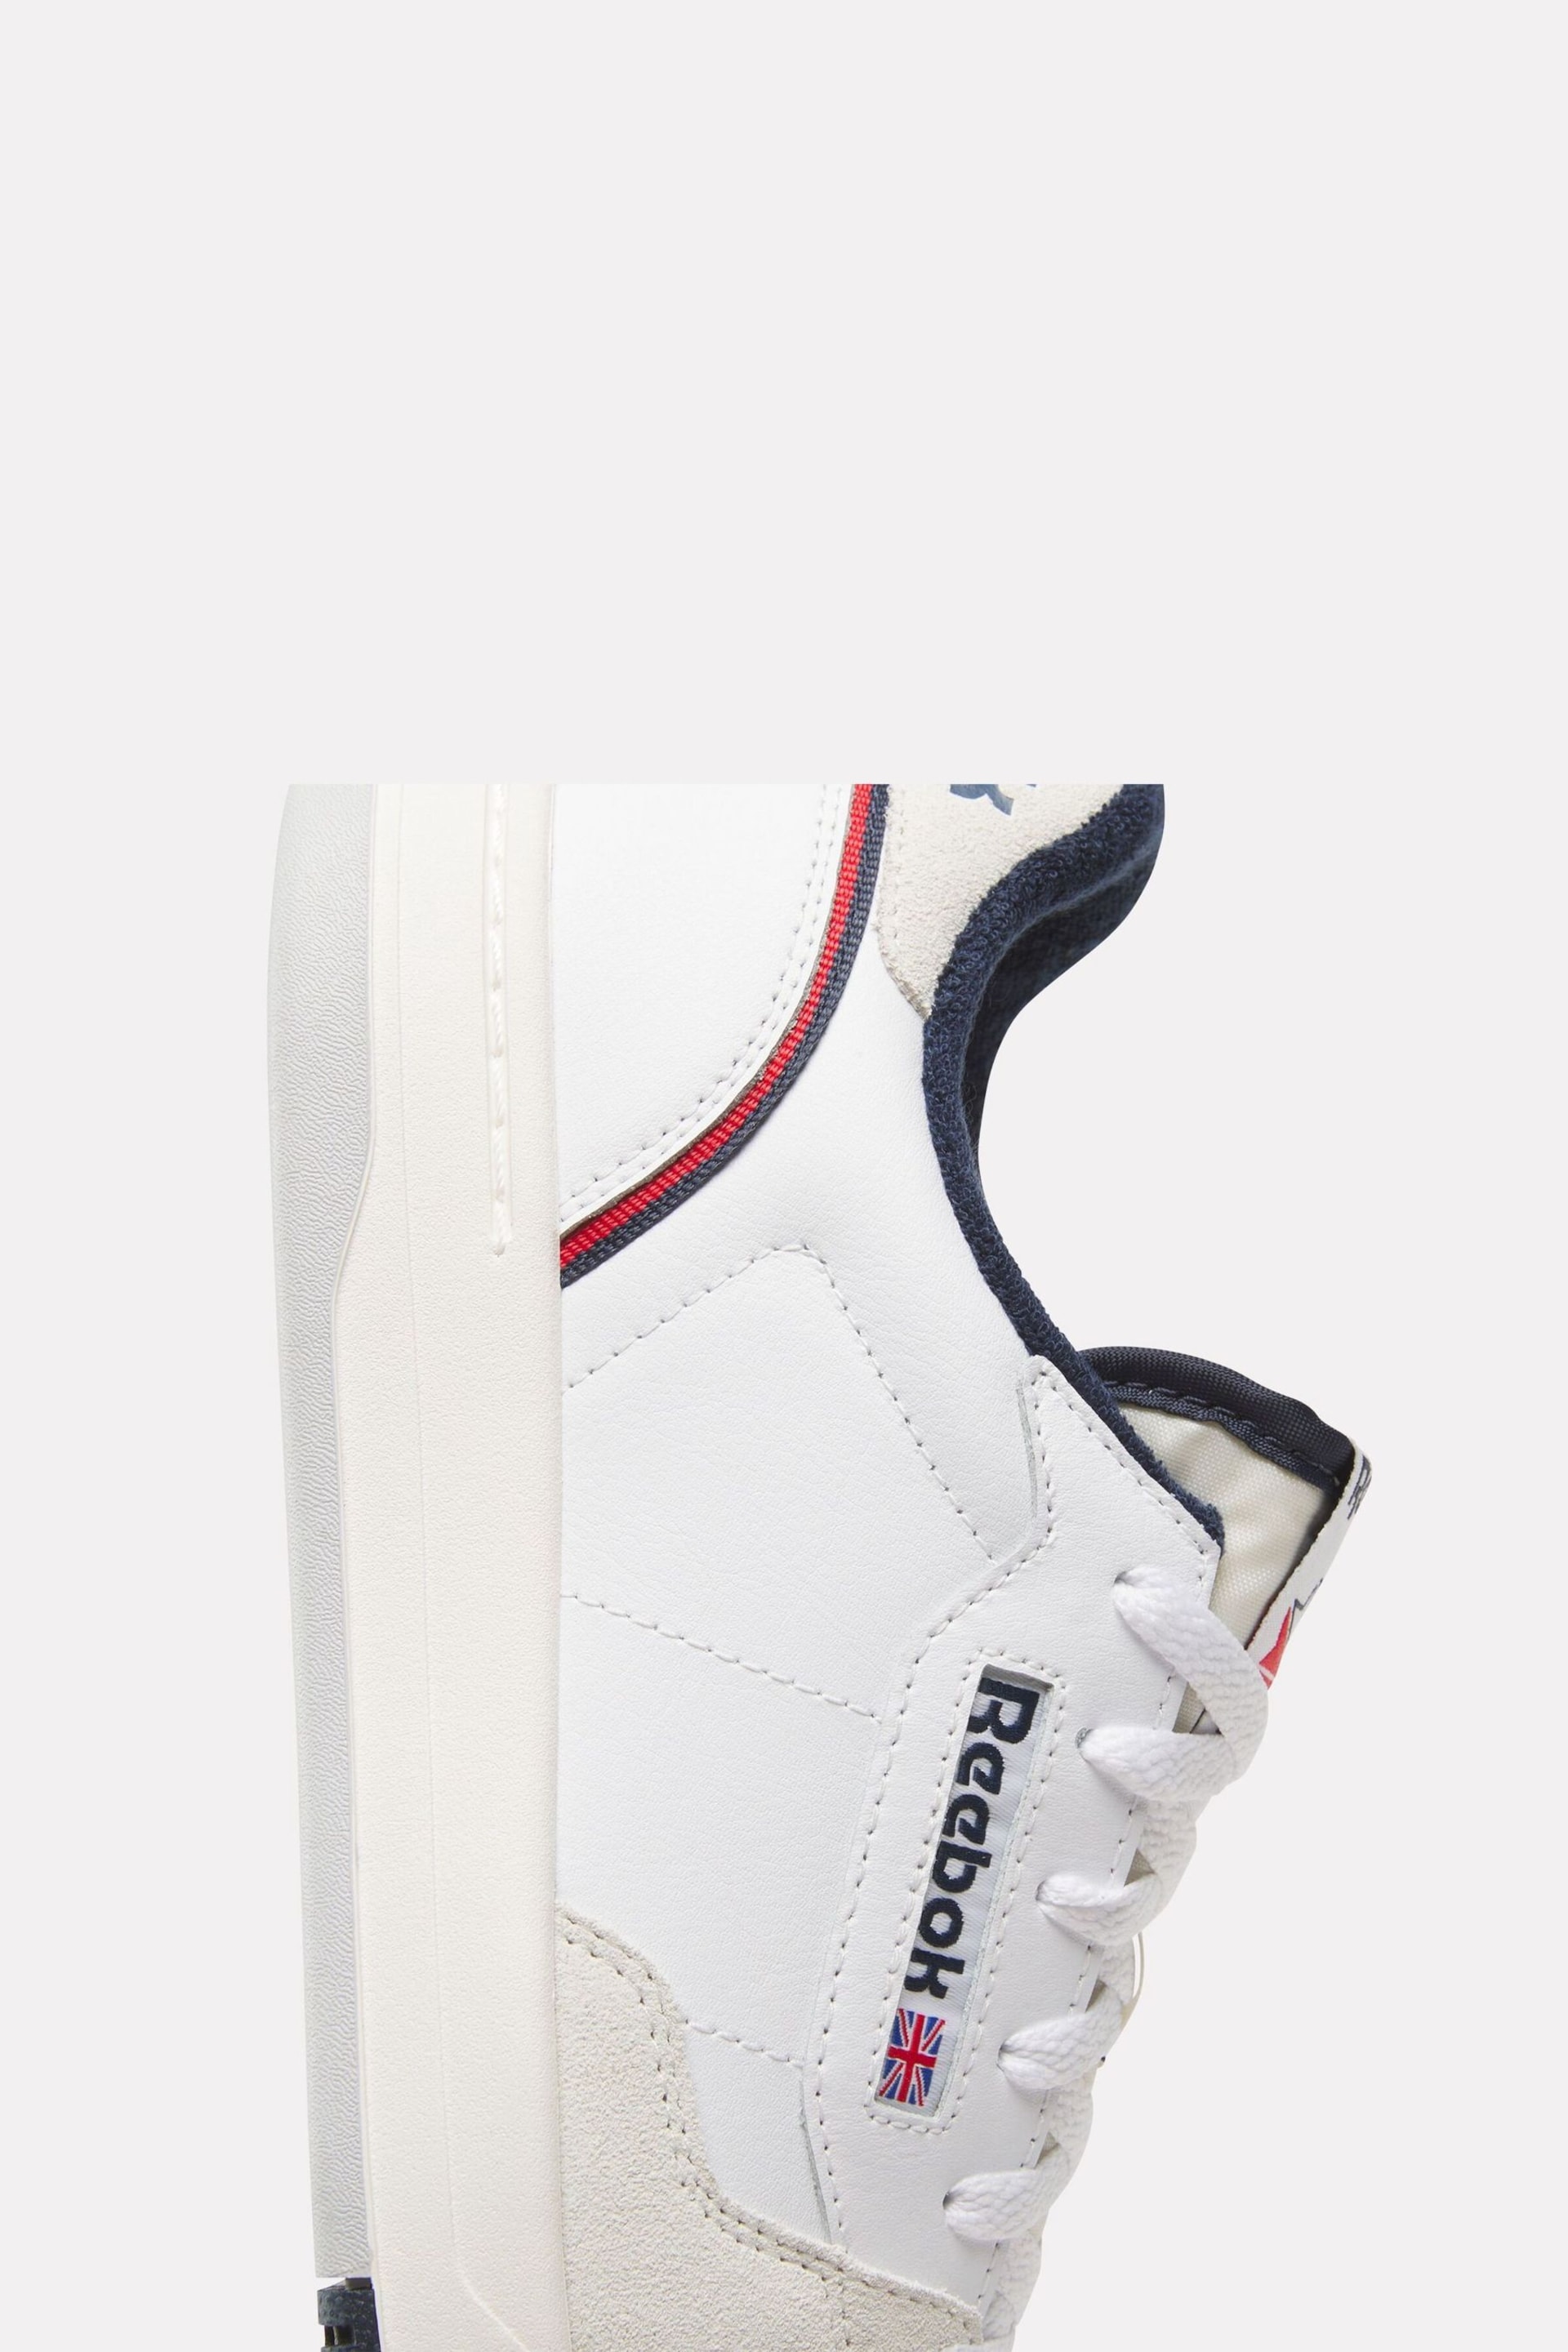 Reebok Mens Phase Court Trainers - Image 6 of 6